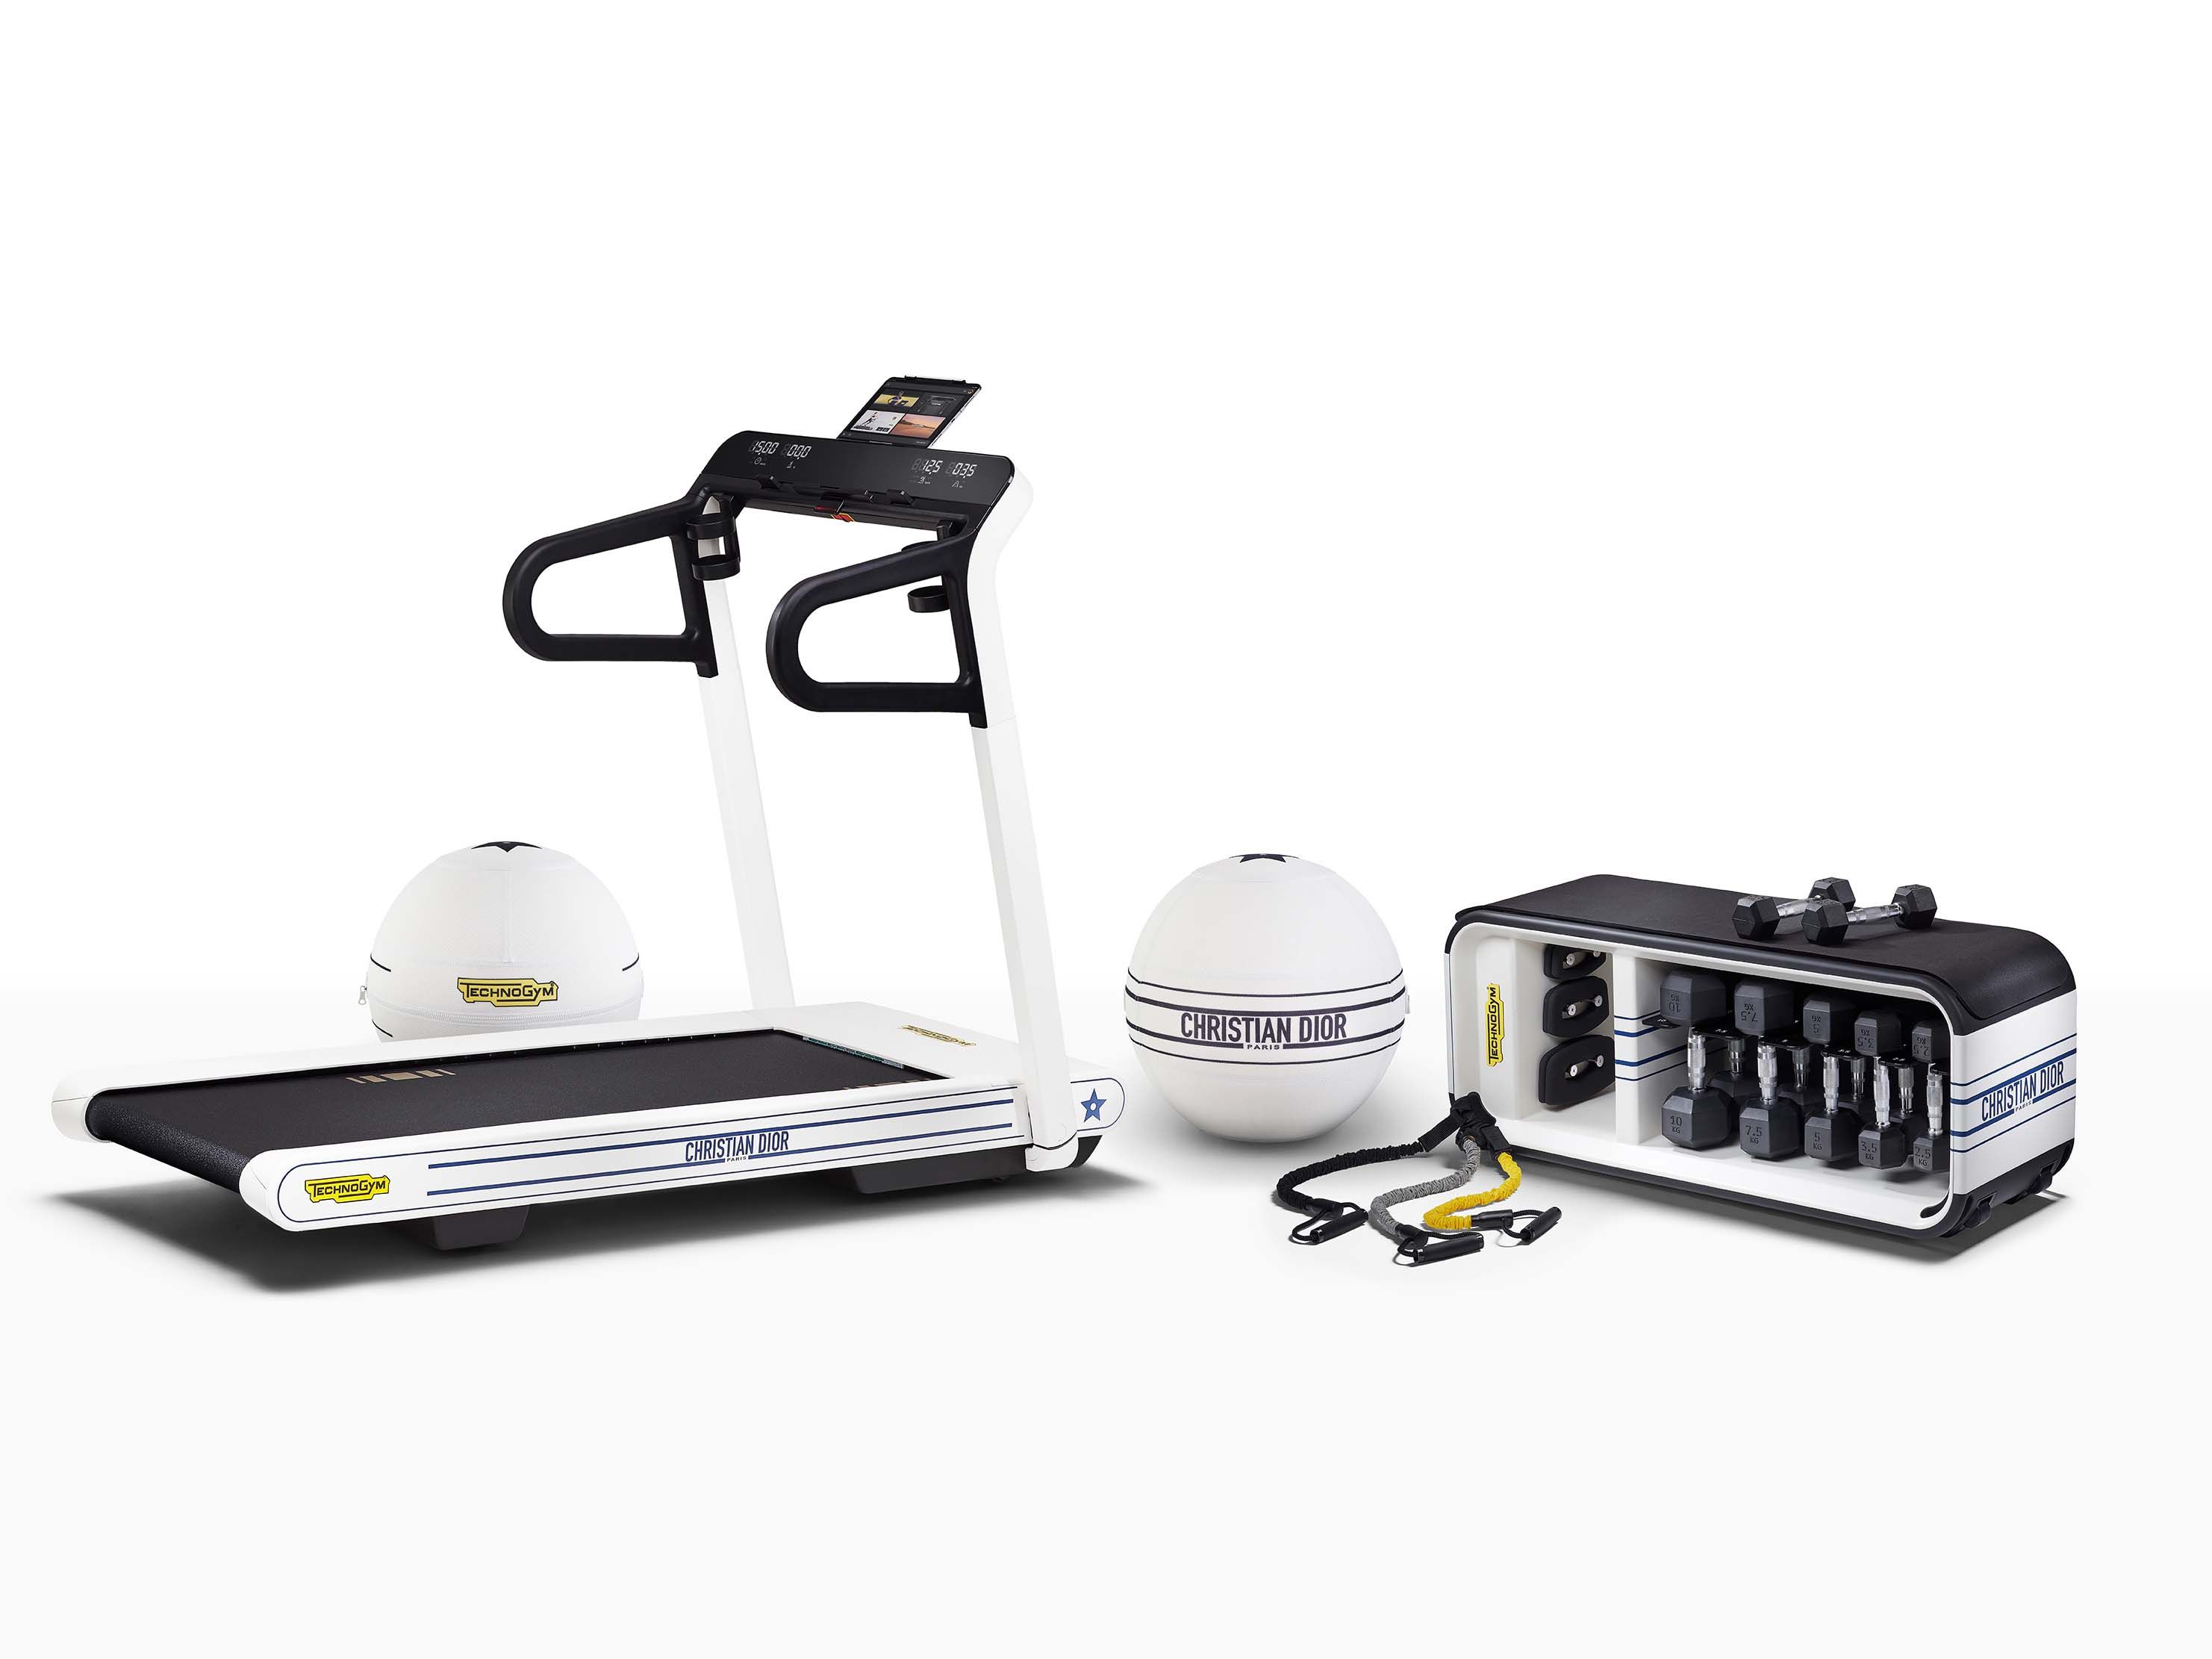 Technogym Bench  The perfect home fitness workout + storage